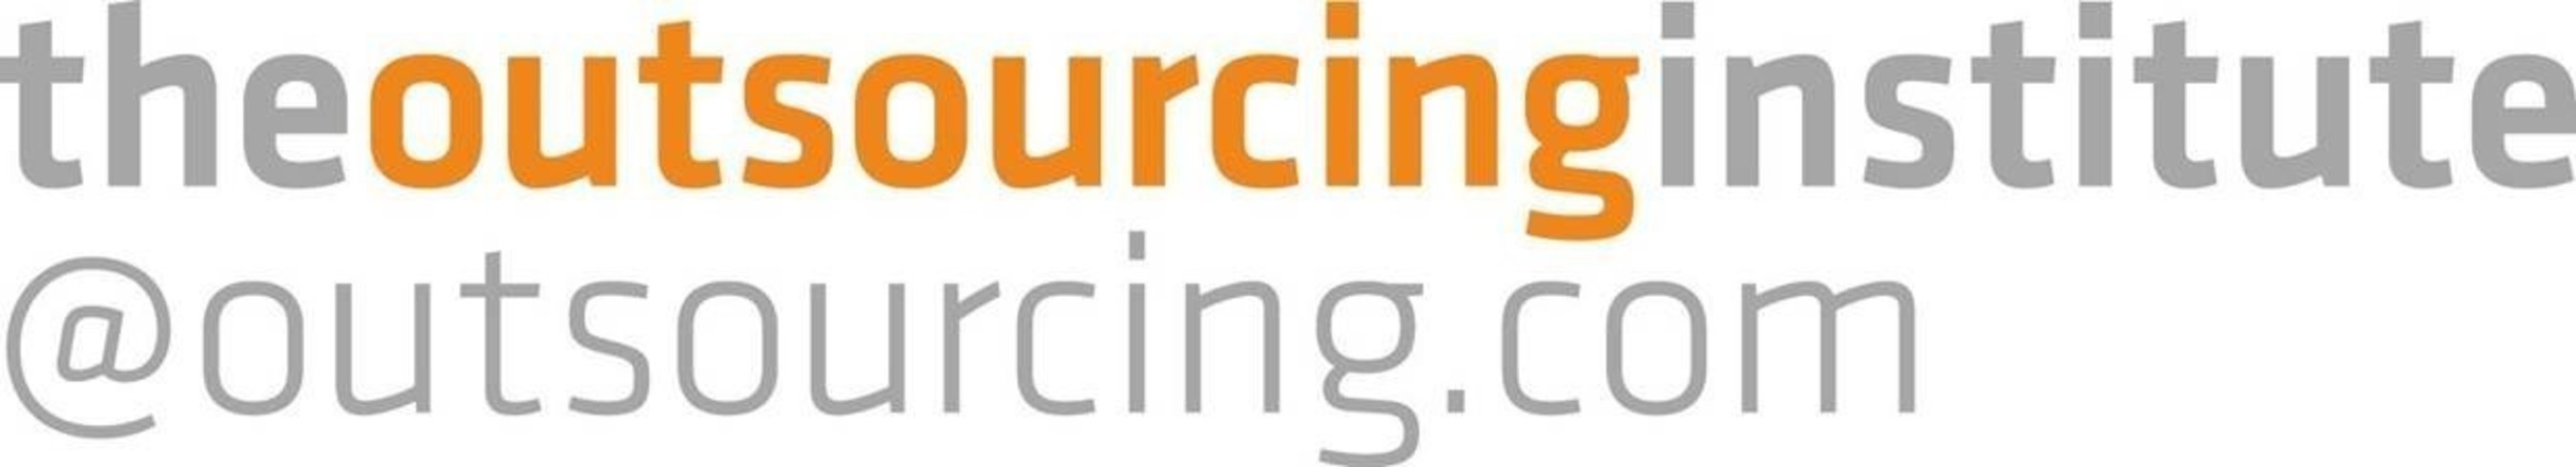 The Outsourcing Institute